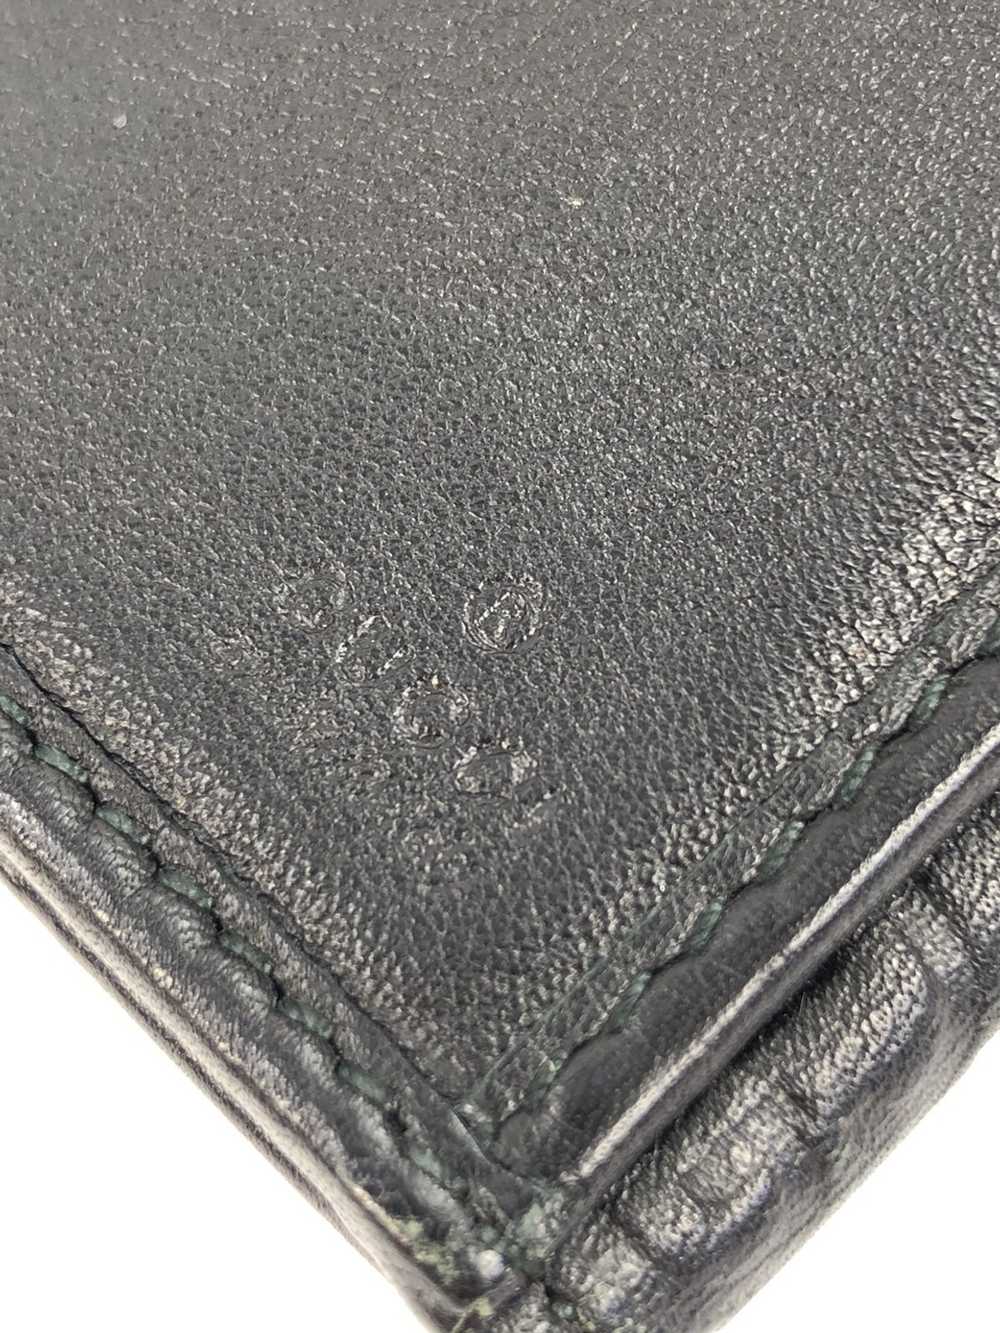 Gucci Gucci GG guccissima leather long wallet - image 5